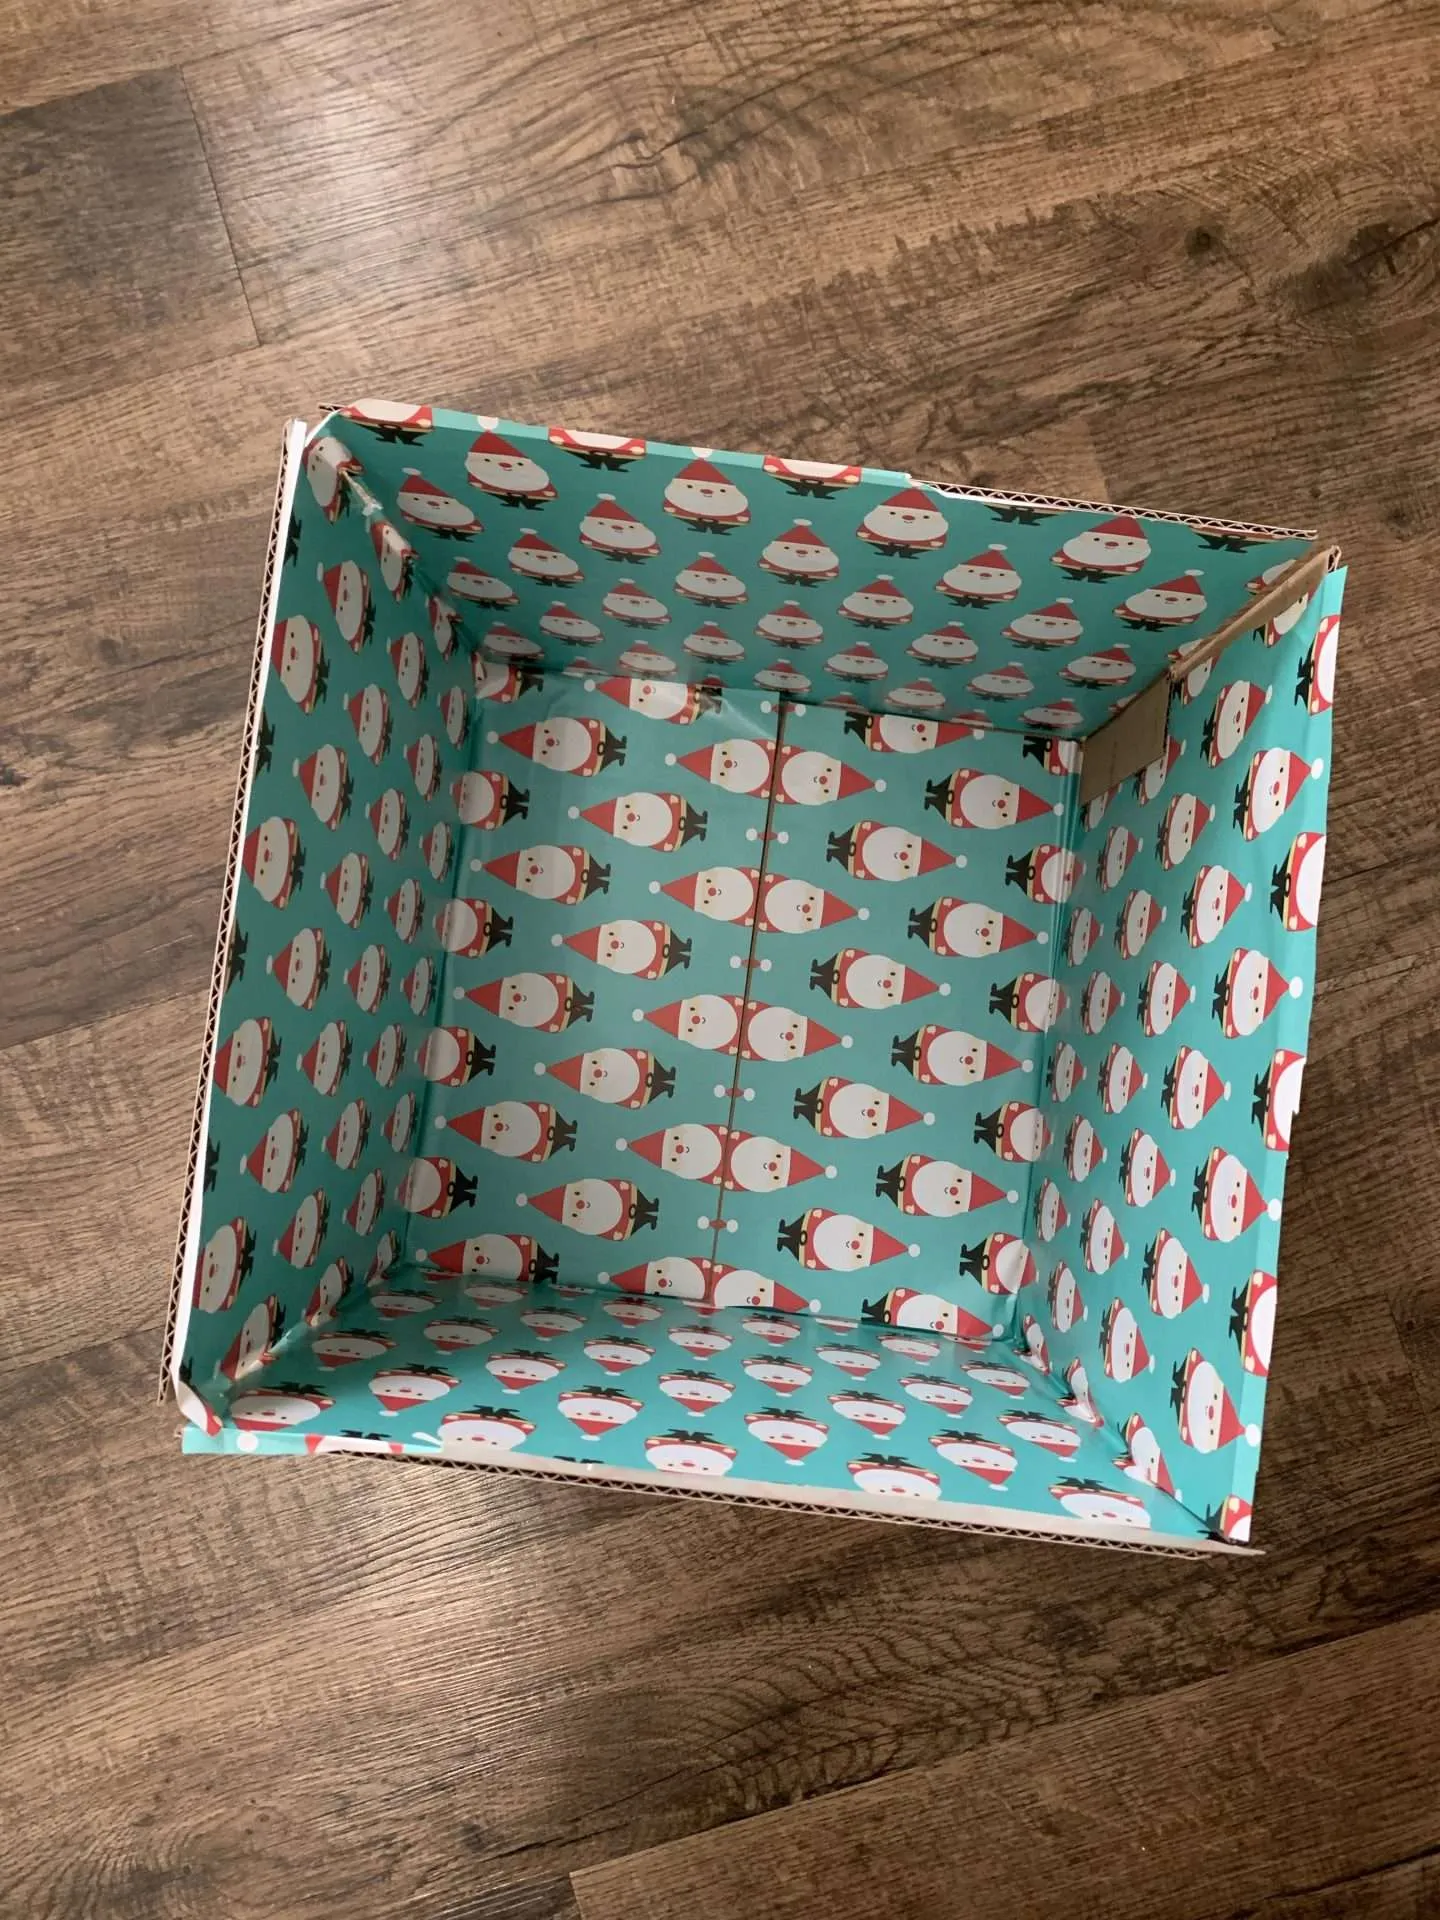 How to Wrap the Inside of the box.